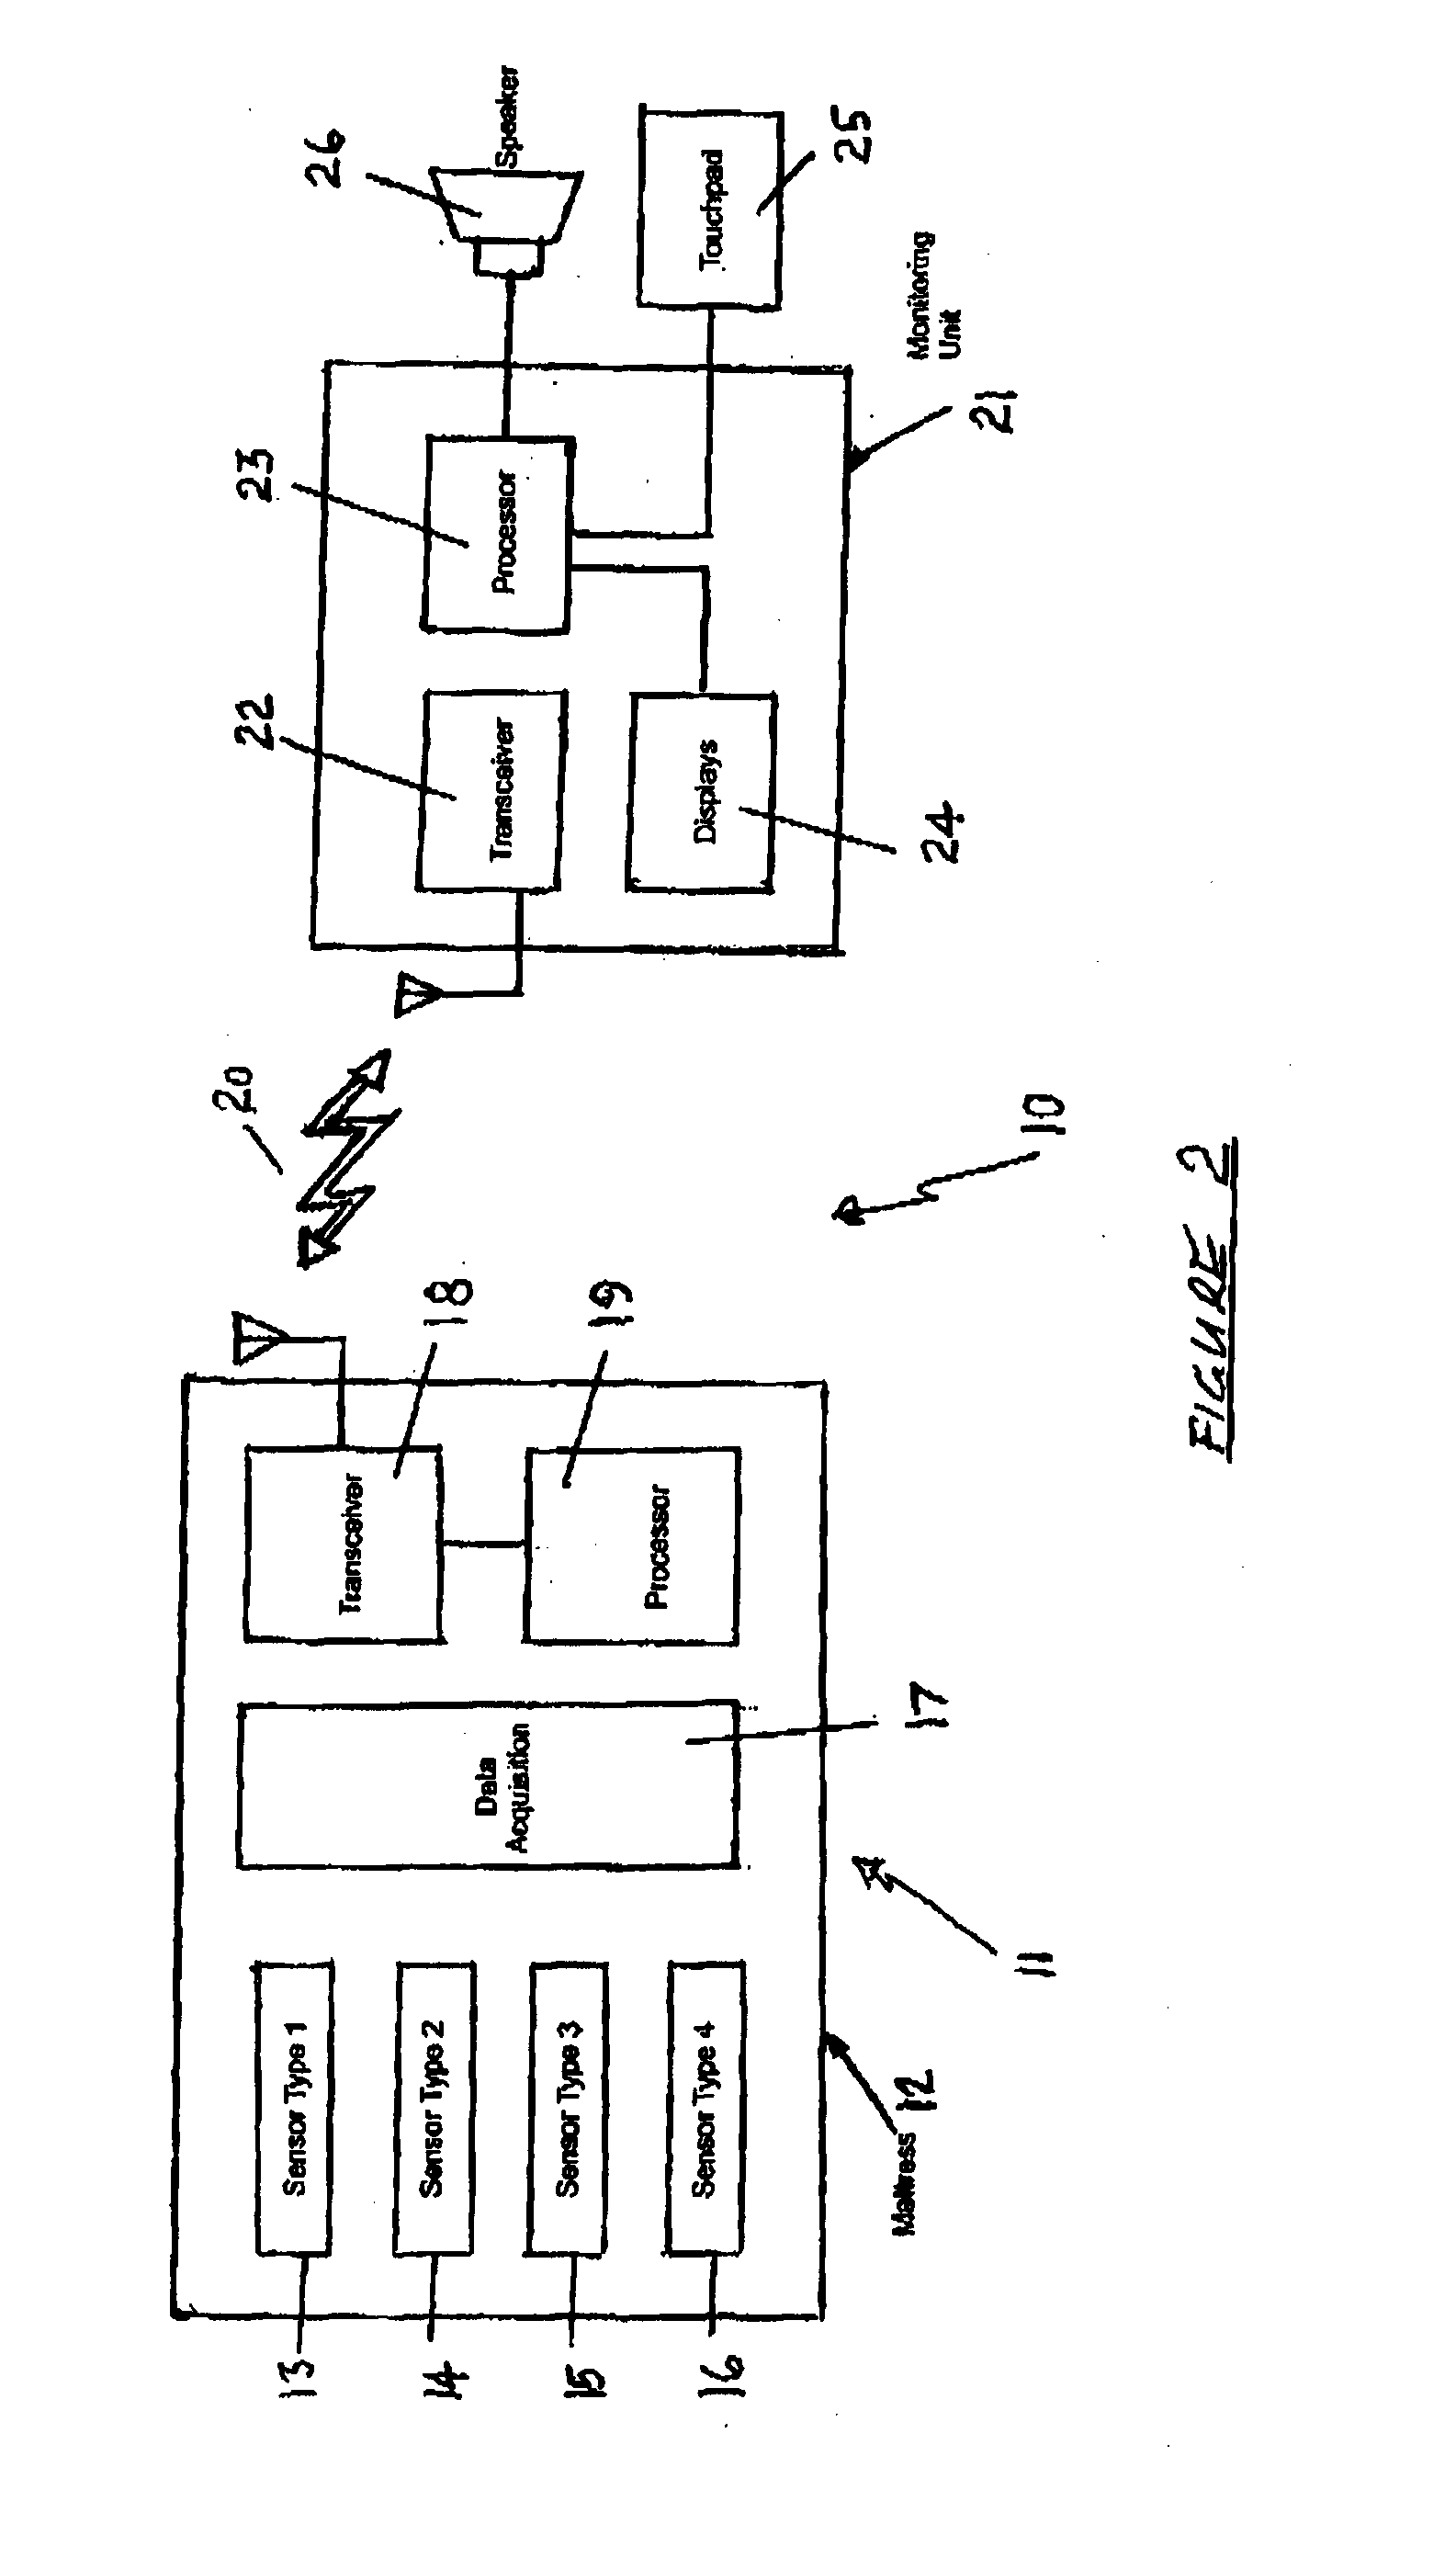 Electronic Monitoring System for Data Collection, Presentation and Analysis